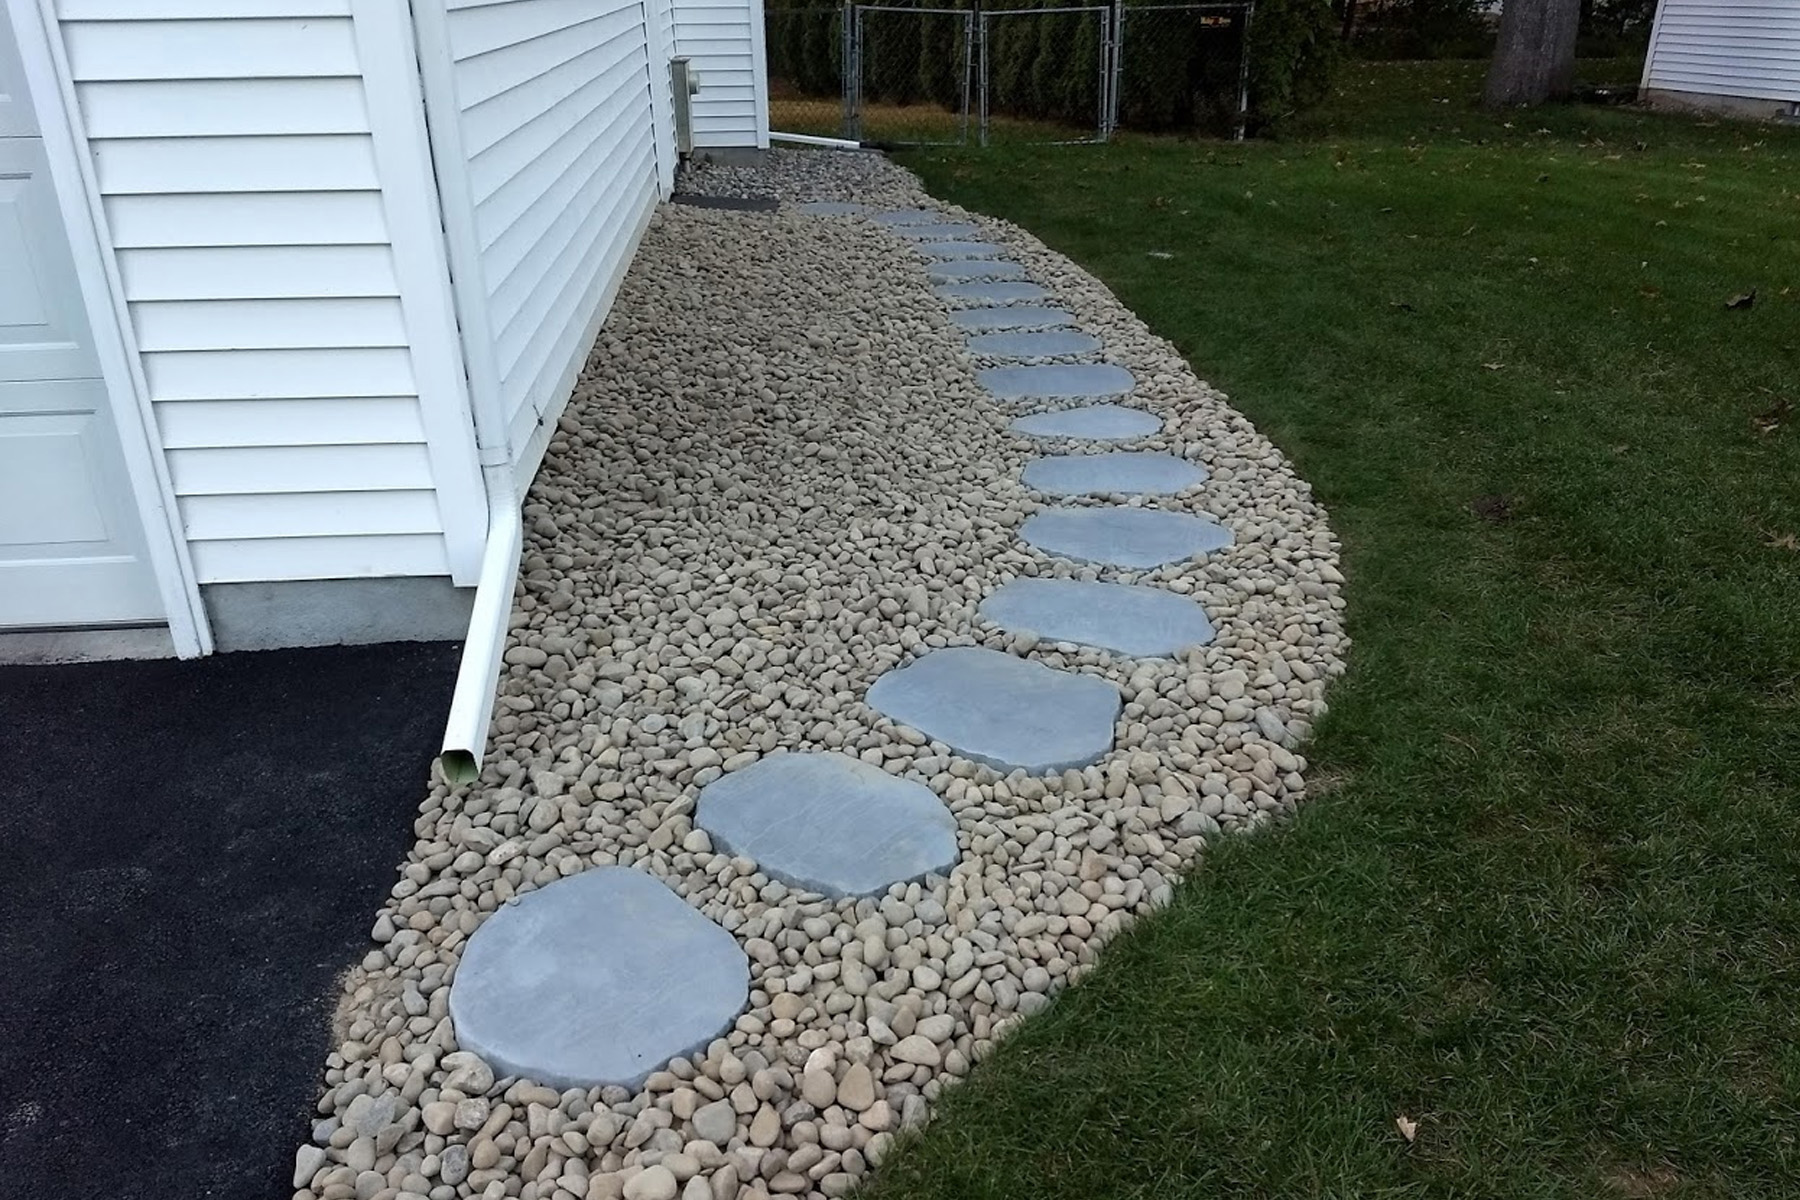 Thumbnail of the completed paver path with smooth lanscaping rocks surrounding the pavers along the side of the garage